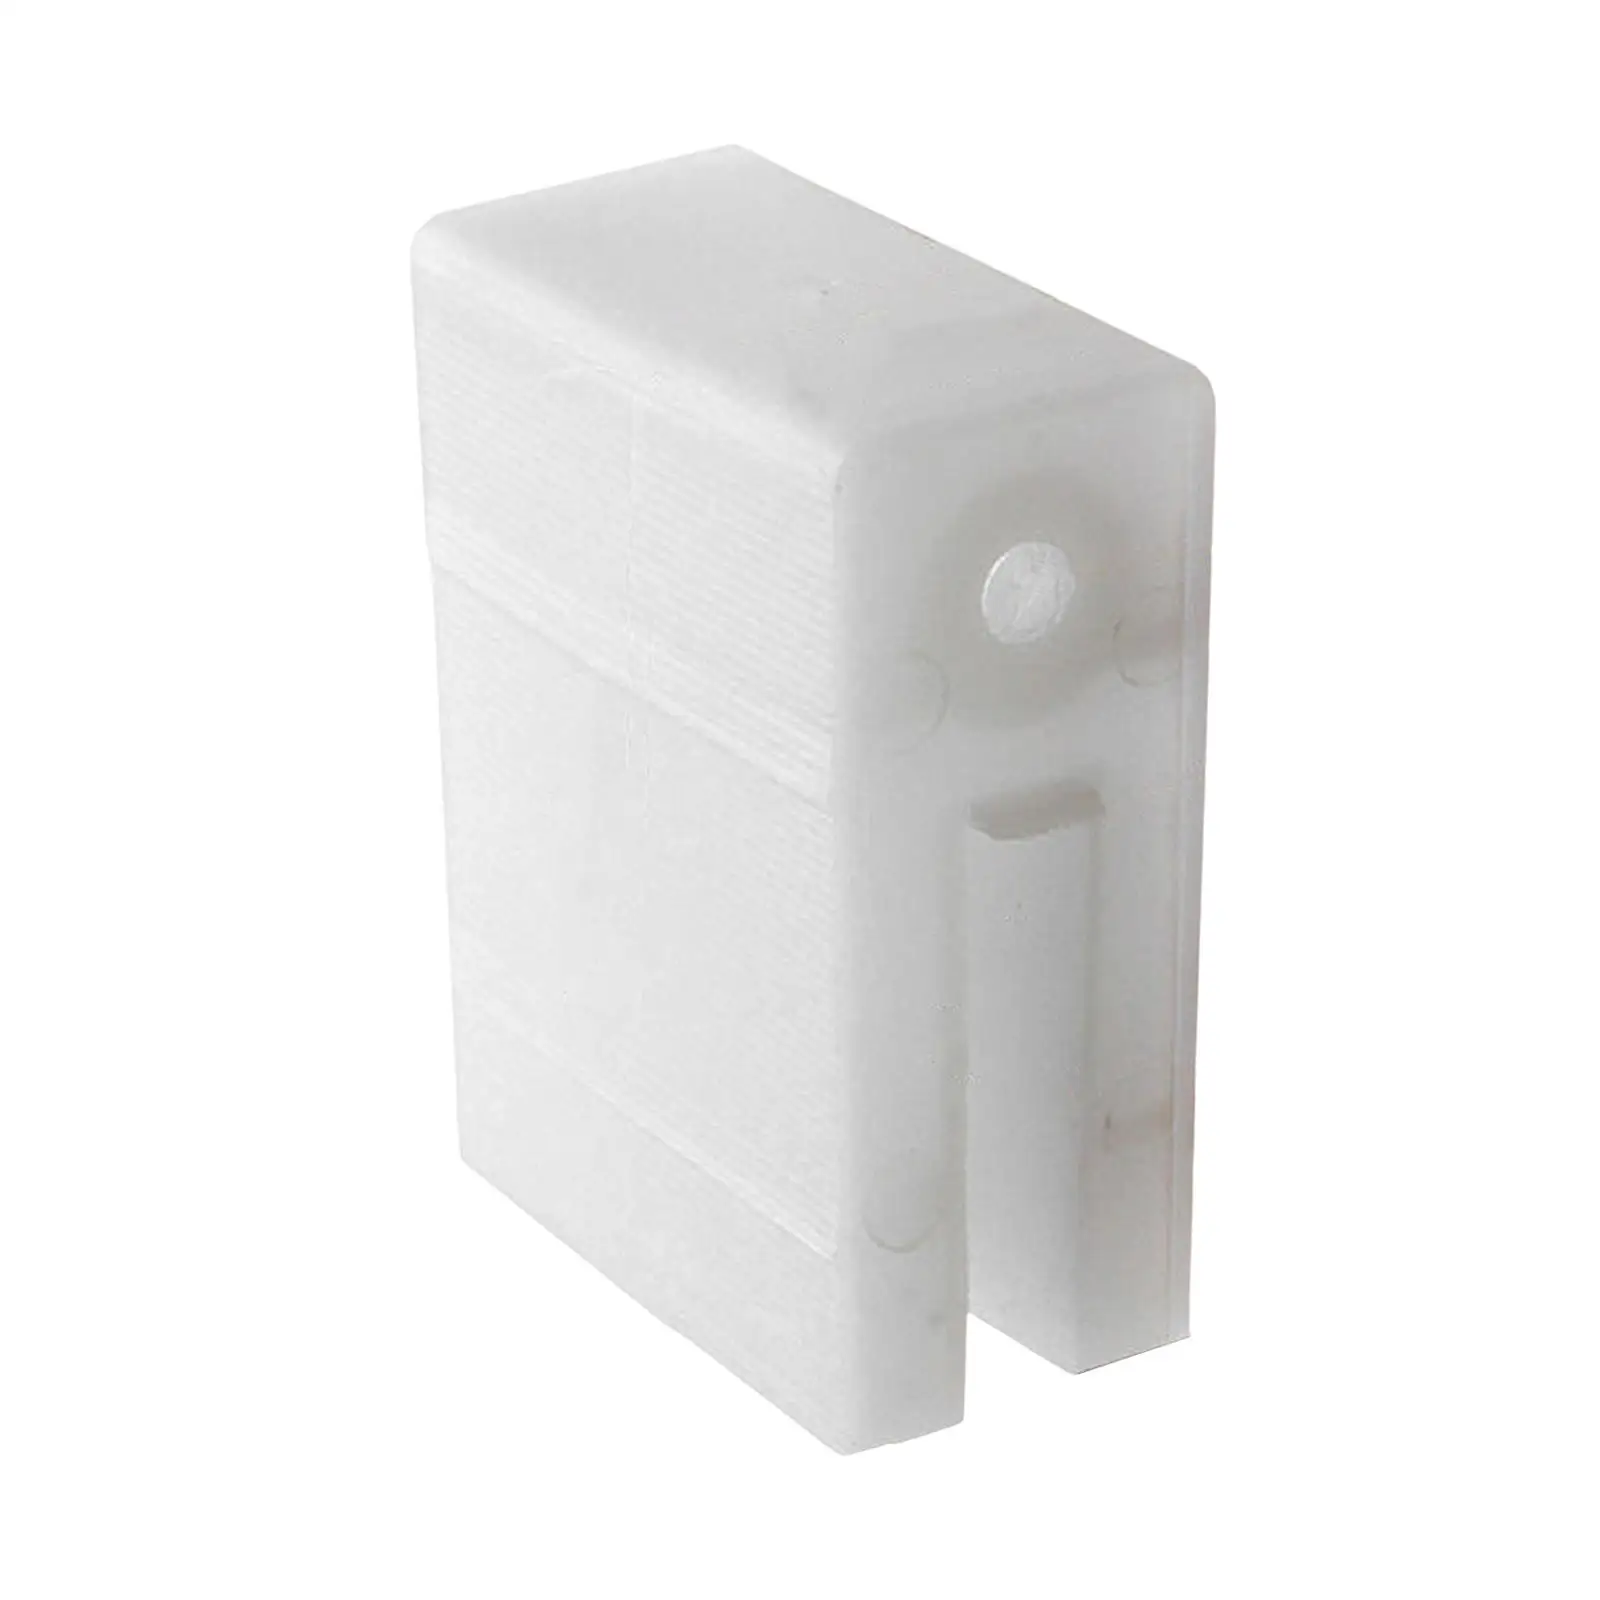 Sliding Window and Door Blocks Replacement Part Easy to Install Window Accessory